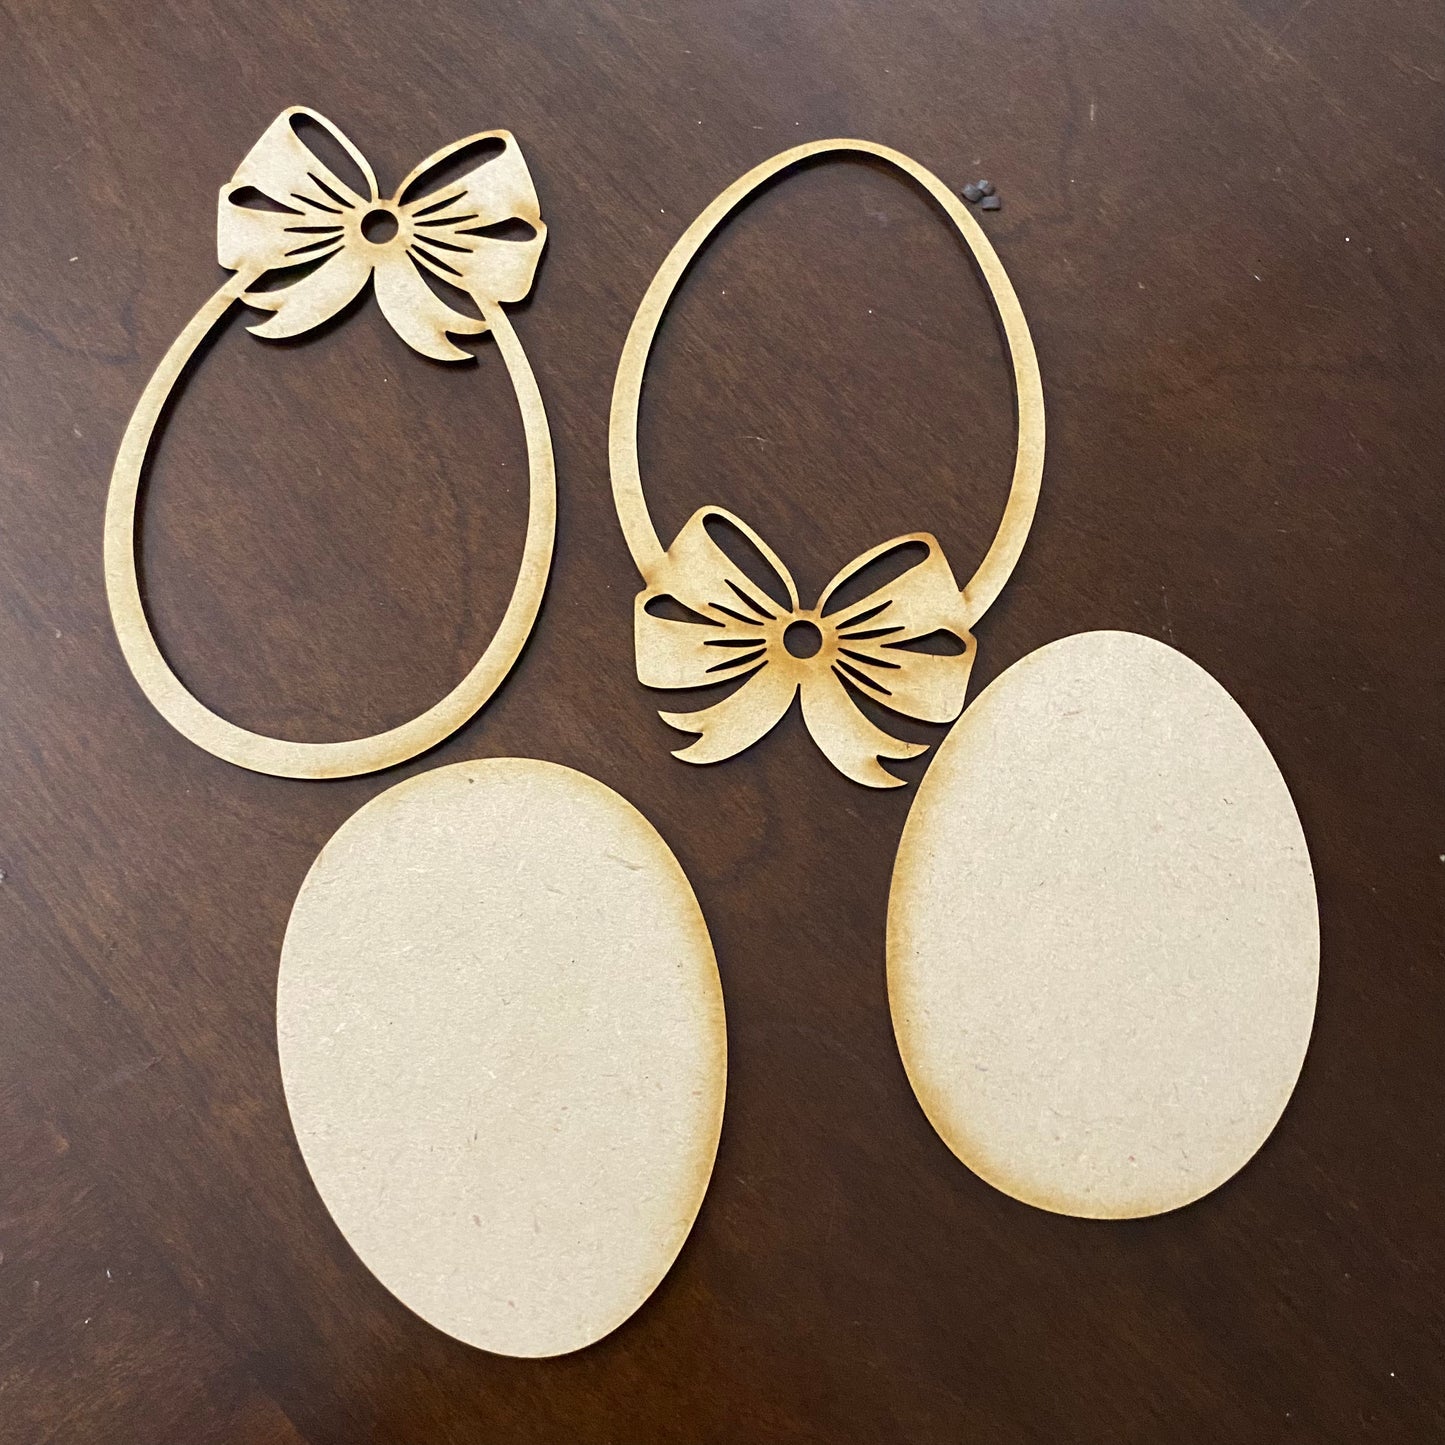 Set of 2 Easter Egg Ornaments with Bows